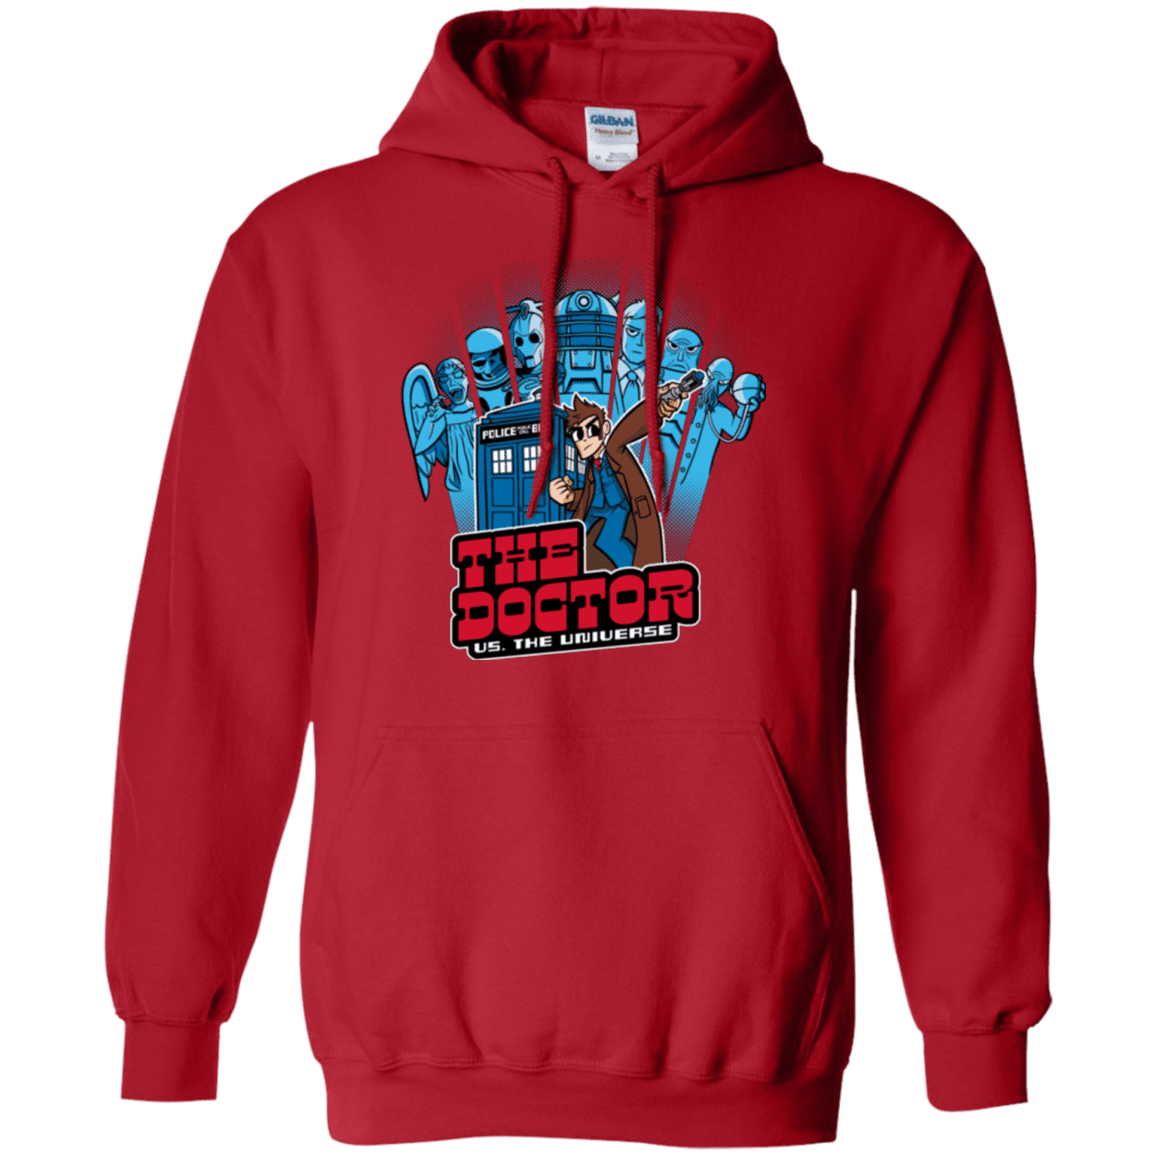 Sweatshirts Red / Small 10 vs universe Pullover Hoodie